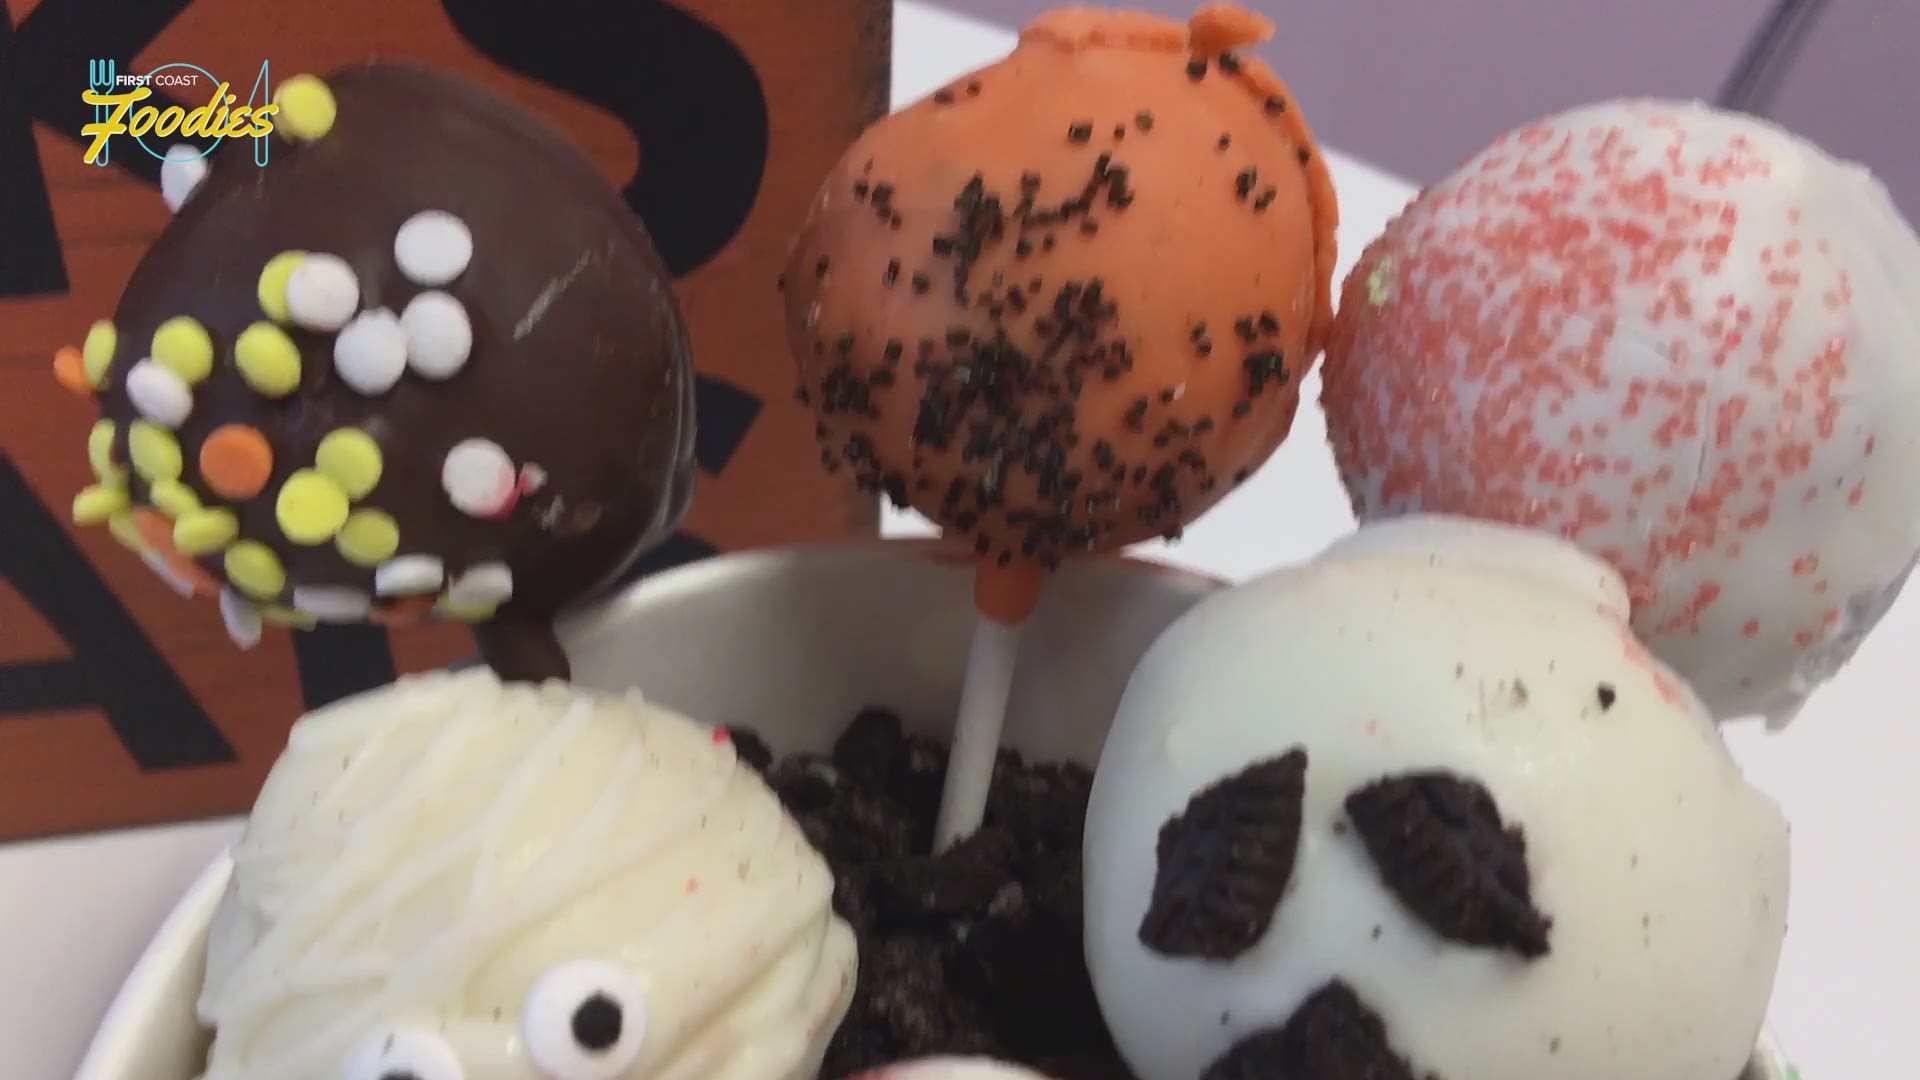 First Coast Foodies asked on social media where they sell Halloween treats on the First Coast. Here are three places you suggested: